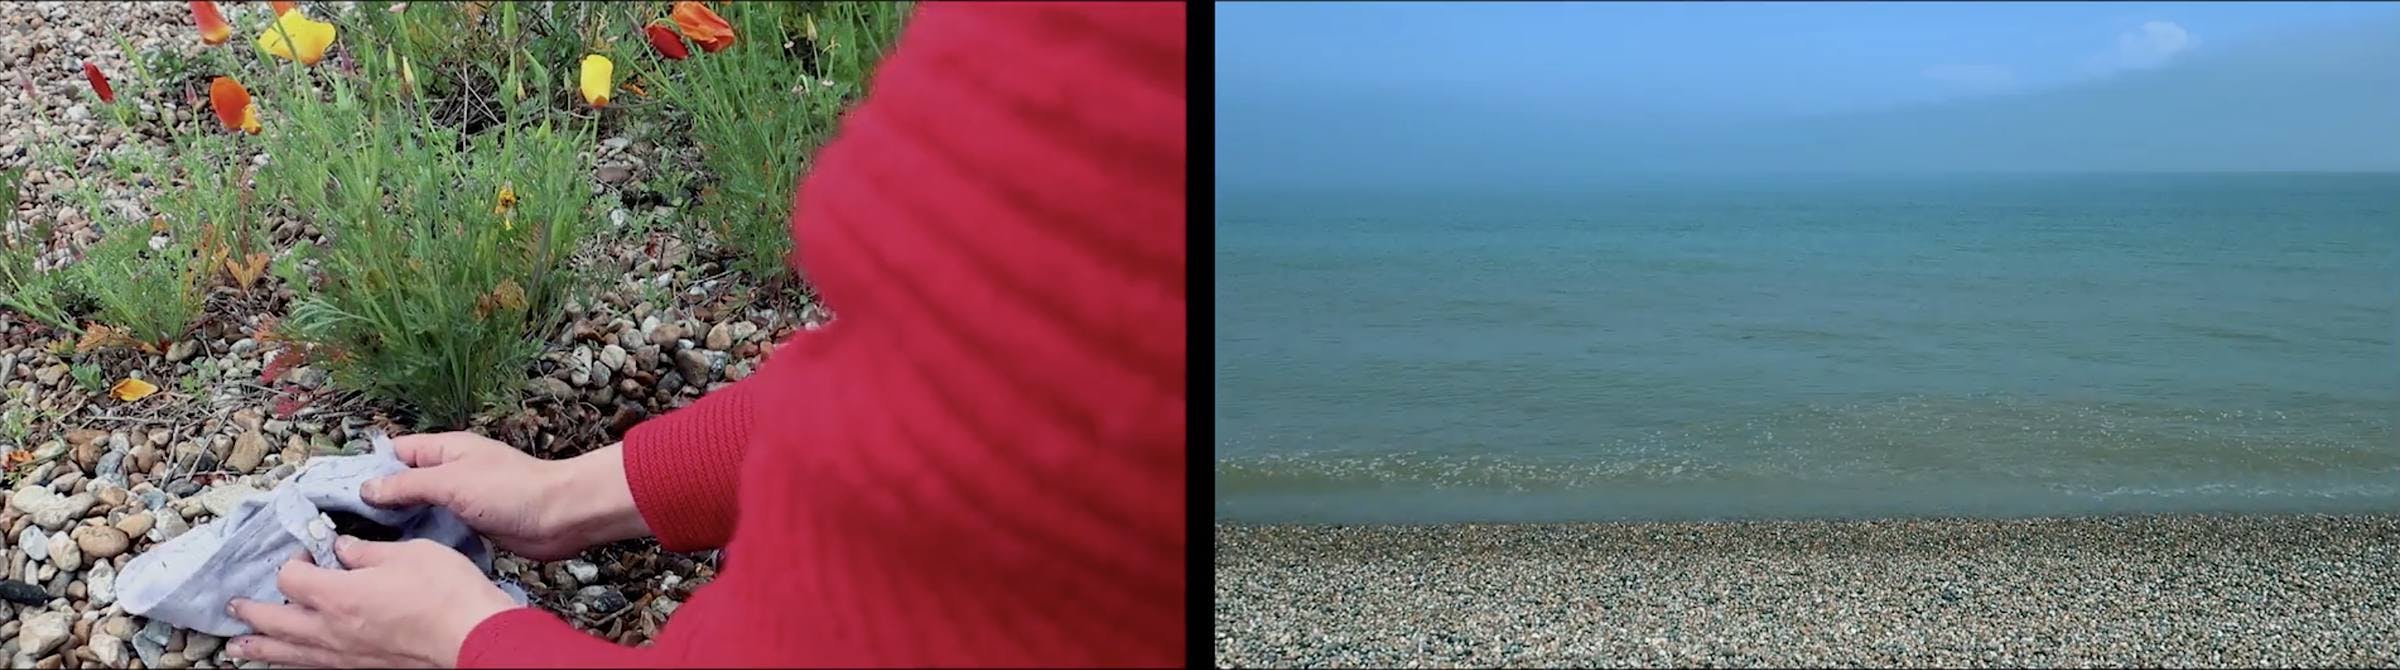 A split screen image. The right hand side is an image of a pebble shore line and the left is a person whose hands are wrapping earth into a piece of fabric. There are yellow and red flowers visible and the ground is littered with small stones. The person is wearing a red jumper.